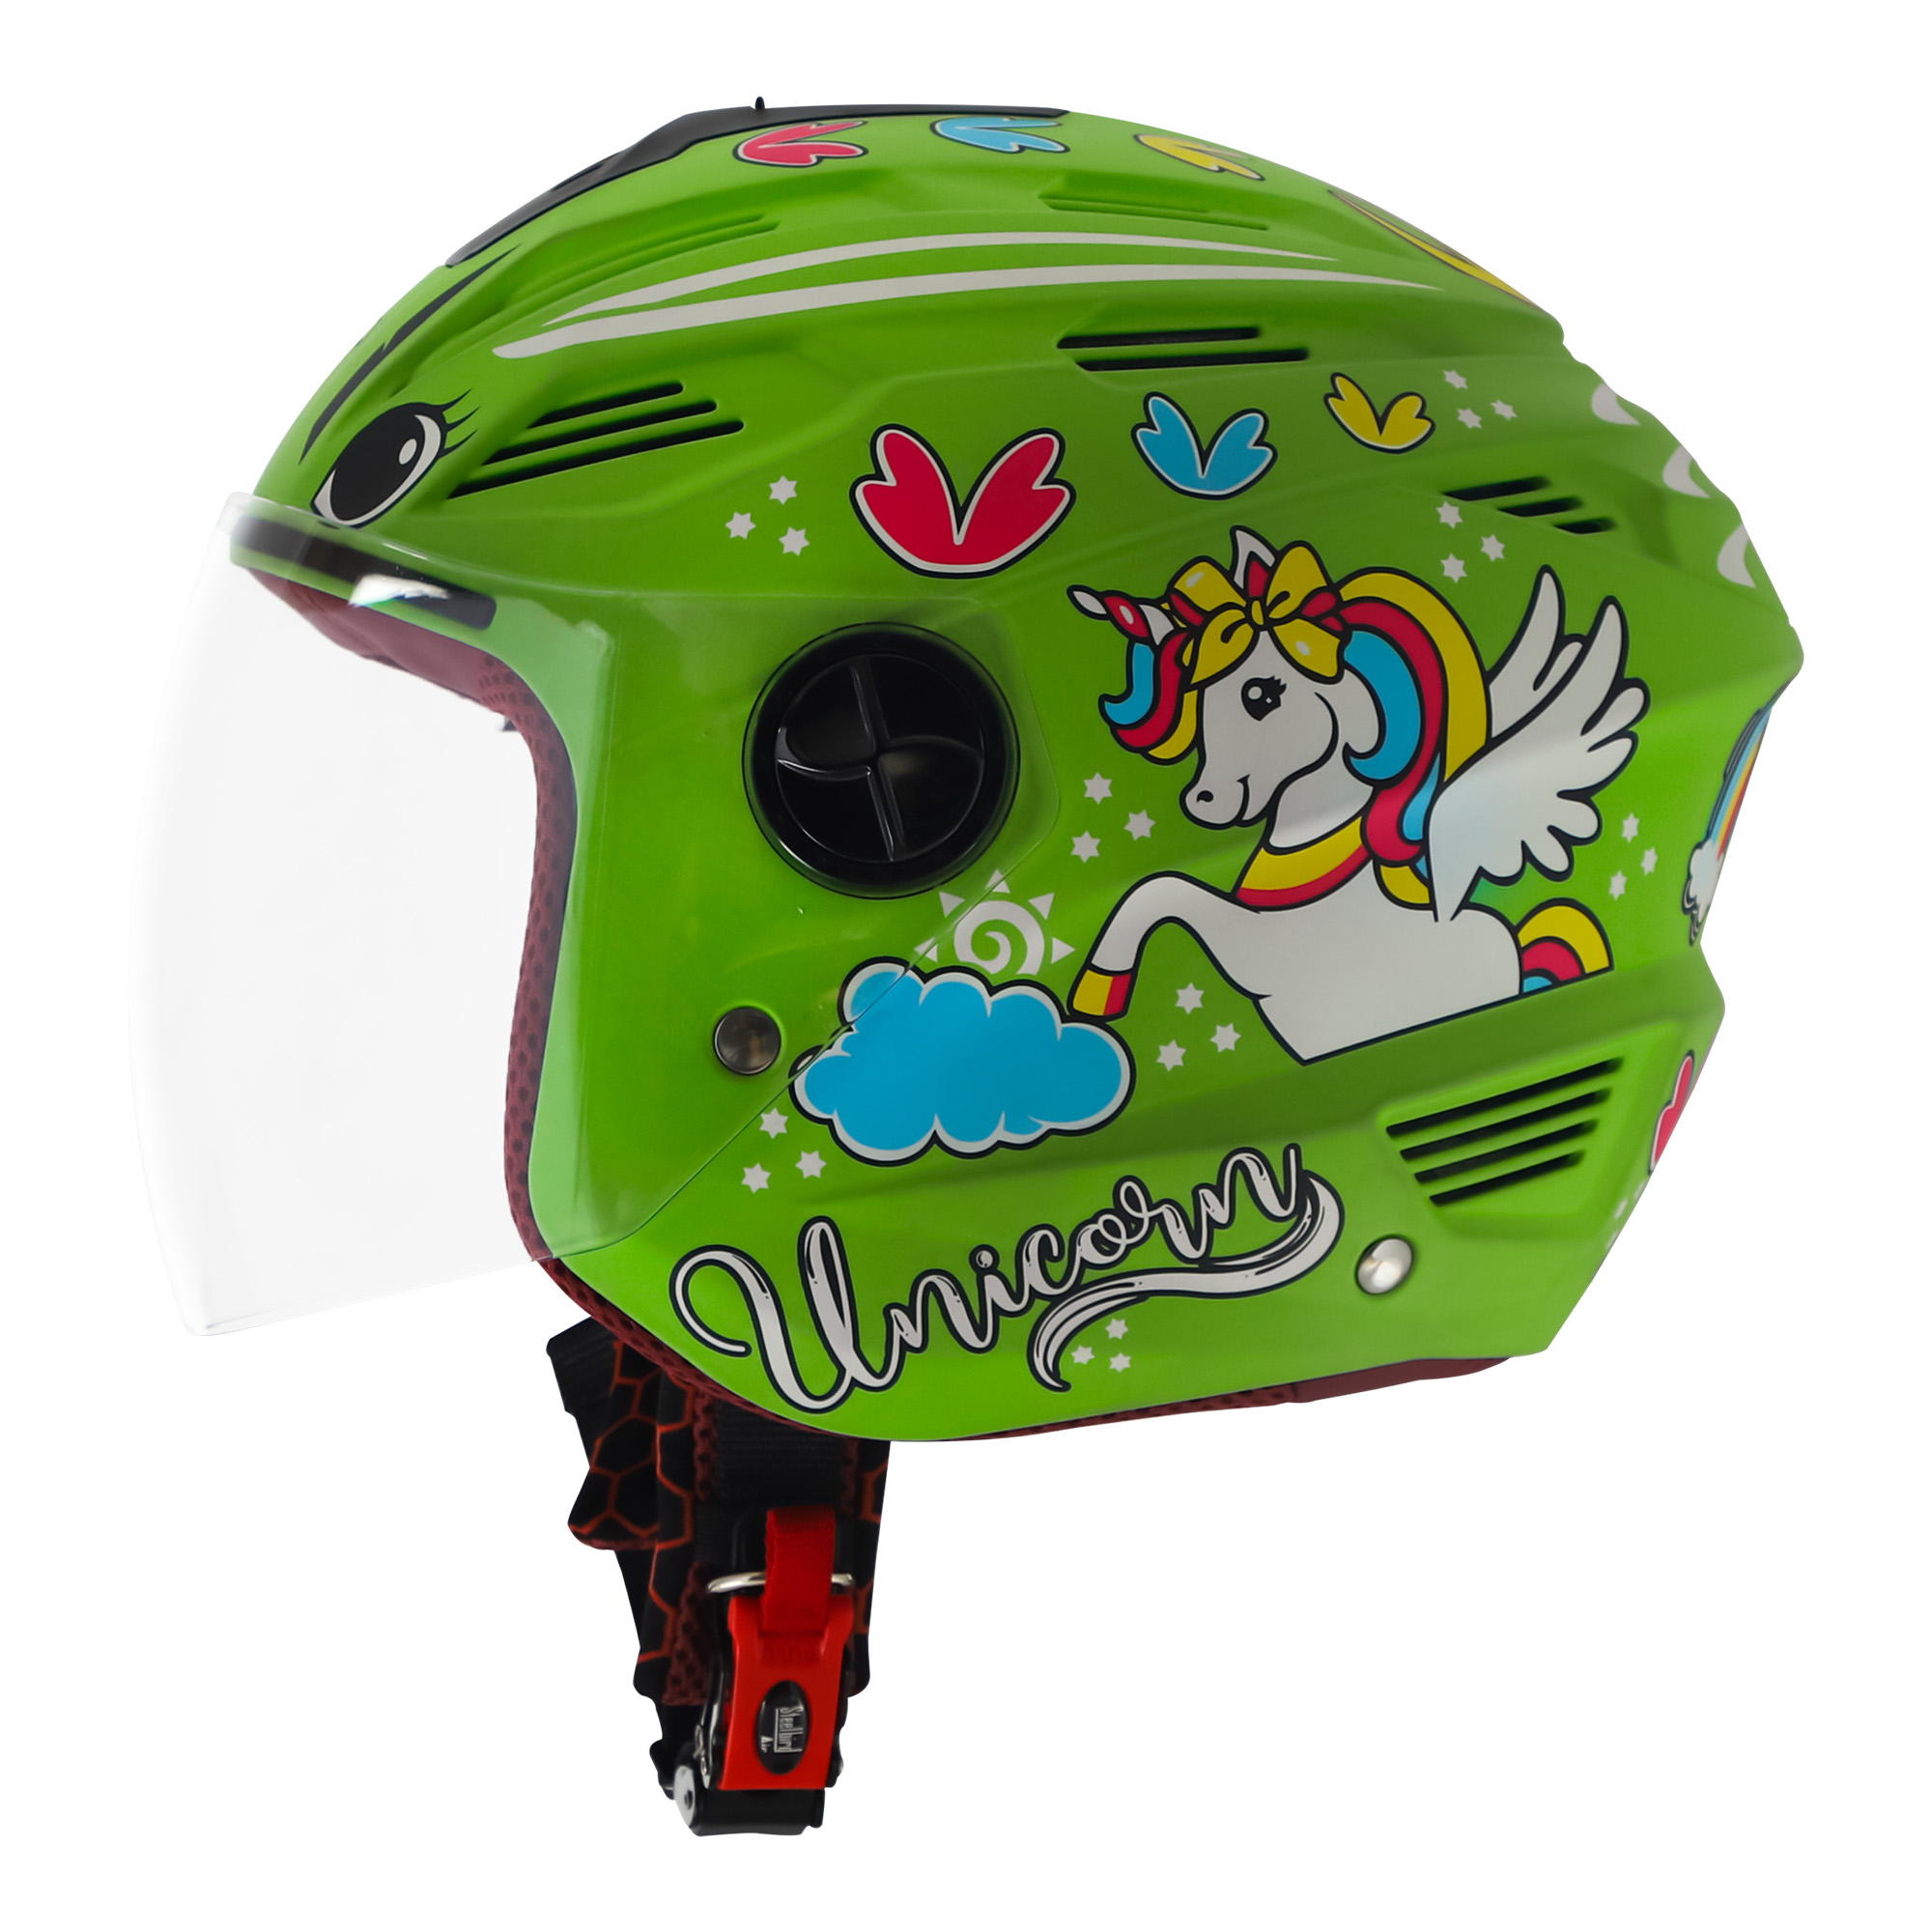 Steelbird SBA-6 Unicorn ISI Certified Open Face Helmet For Men And Women (Glossy Green With Clear Visor)